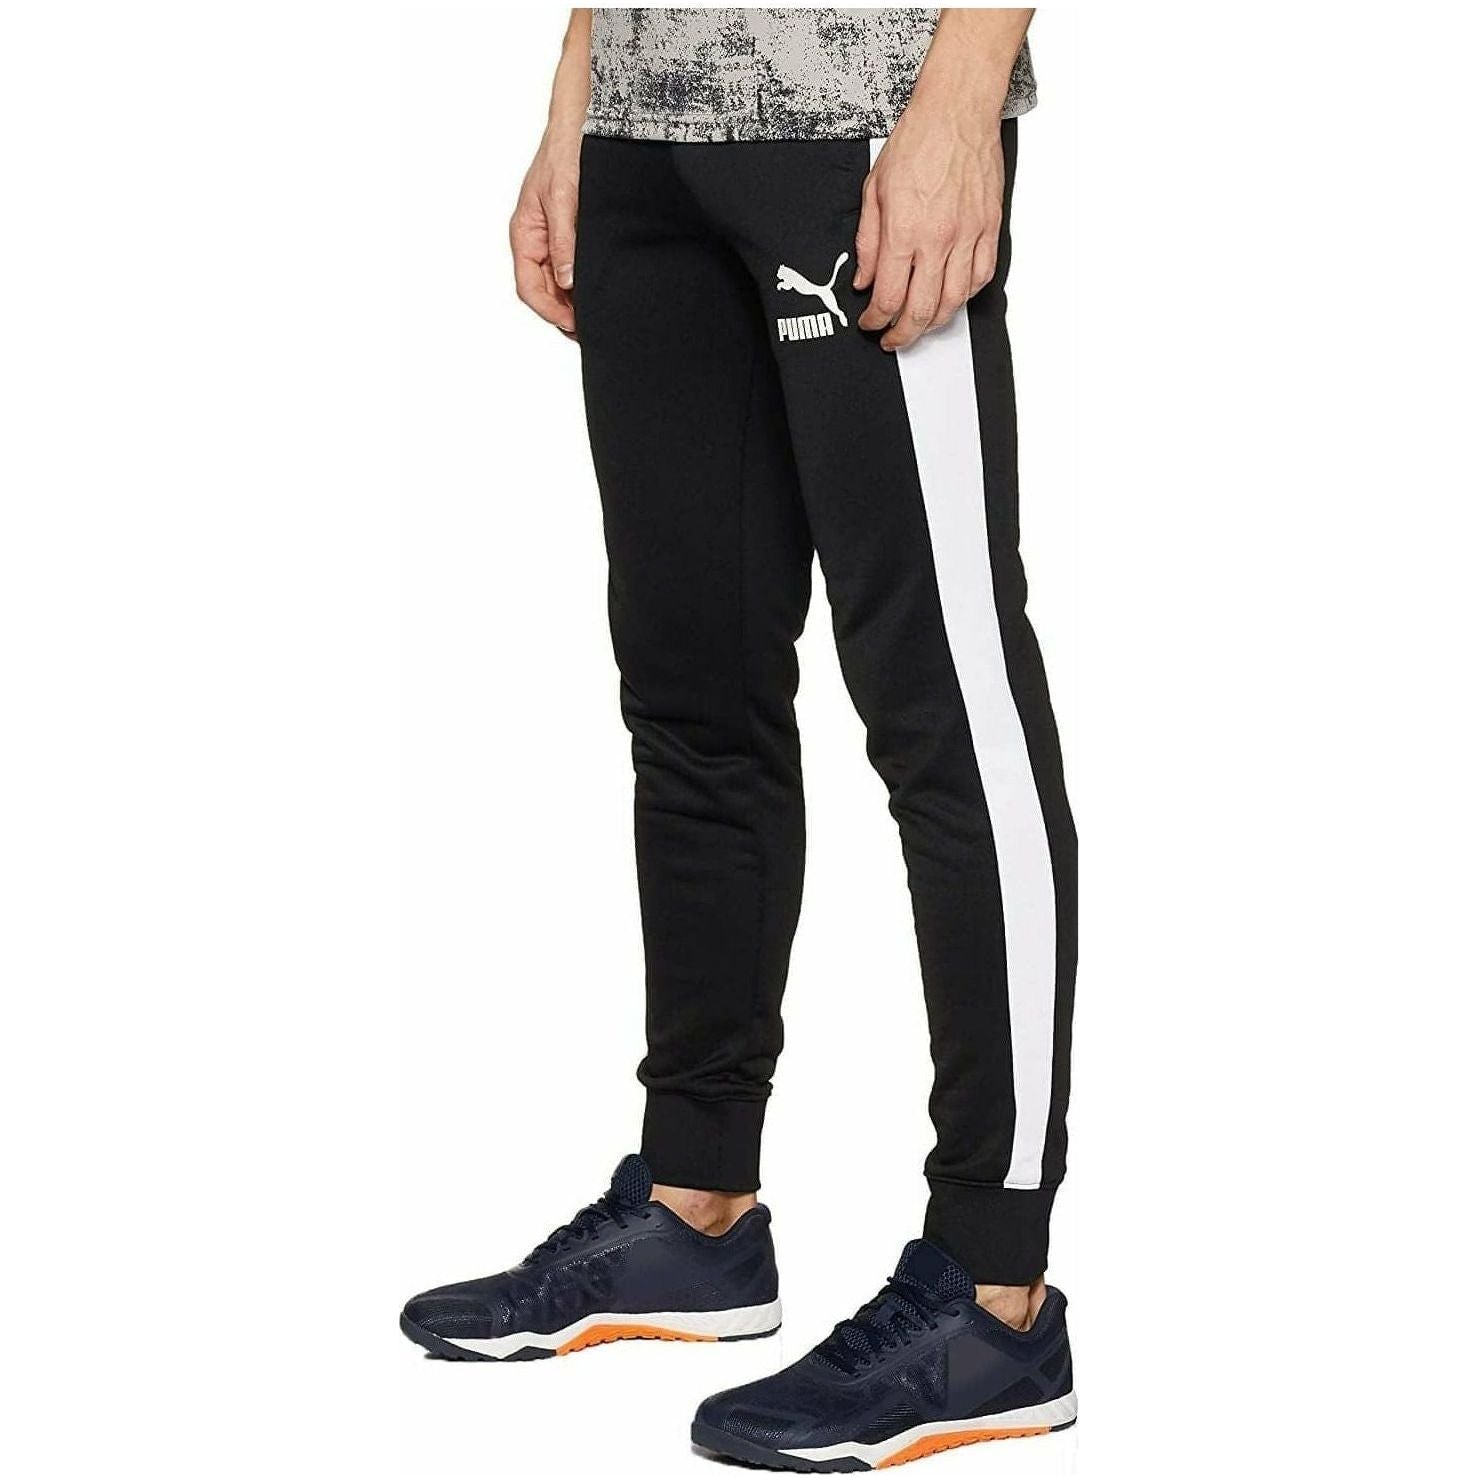 Puma Iconic T7 Knitted Mens Track Pants - Black